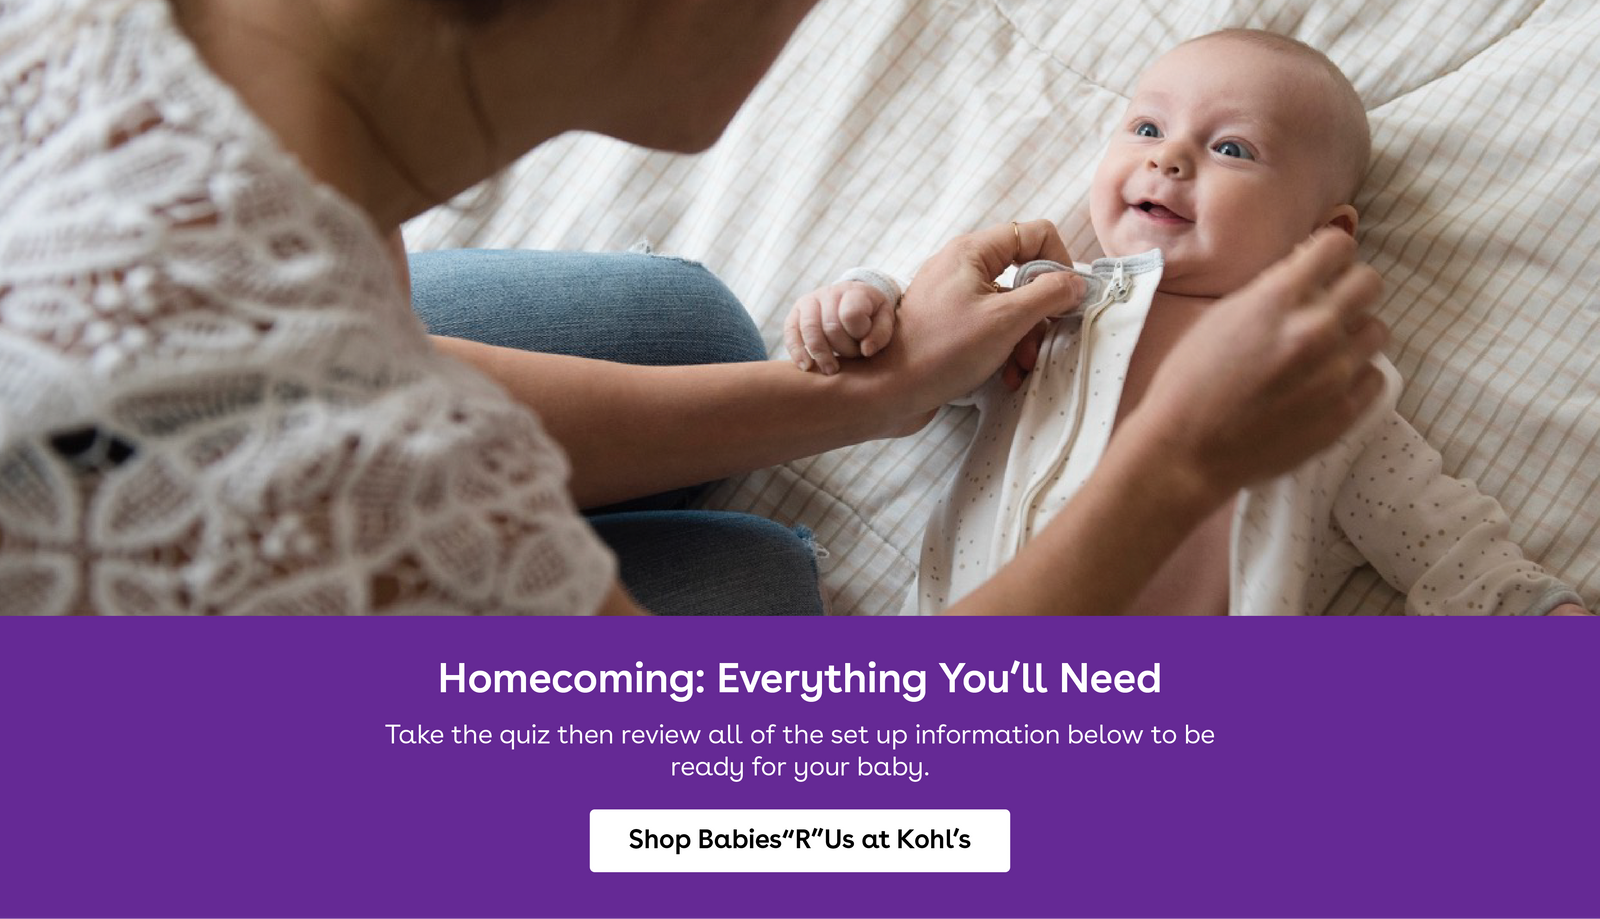 homecoming everything you will need. take the quiz and then review all of the set up information below to be ready for your baby. Shop babies r us at kohls